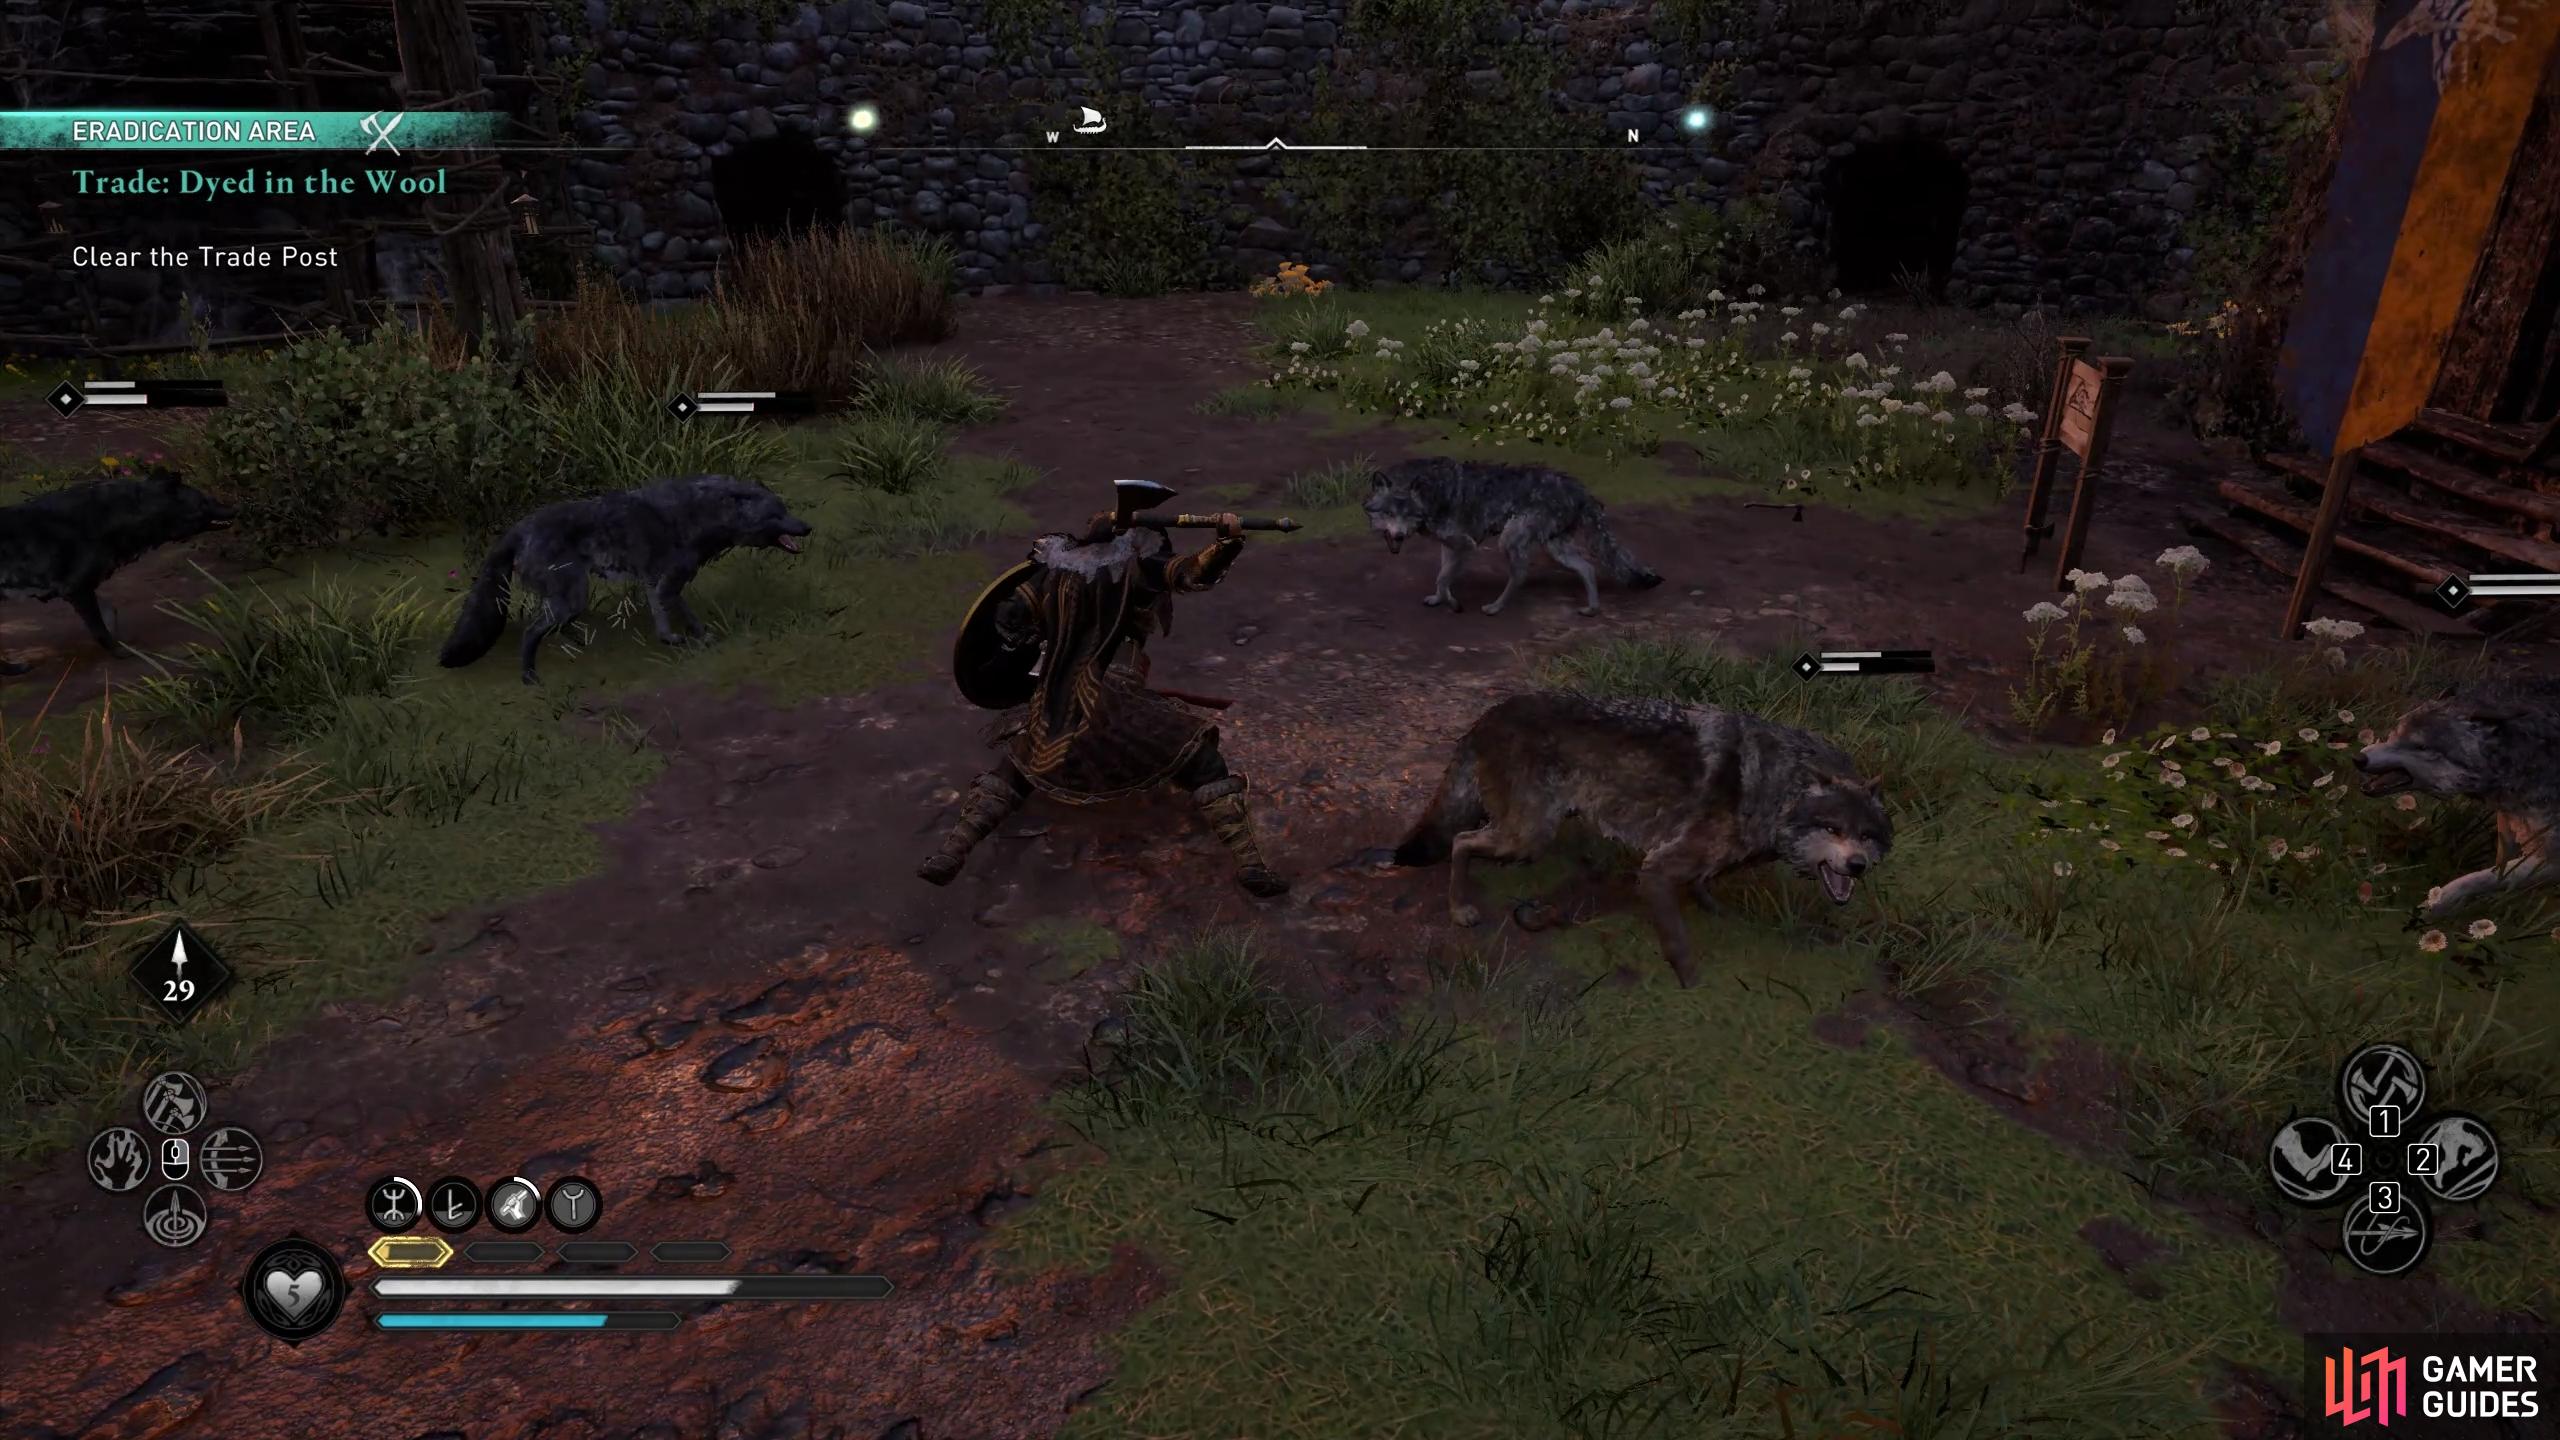 You'll need to clear Drumlish by killing all the wolves before you can investigate it.